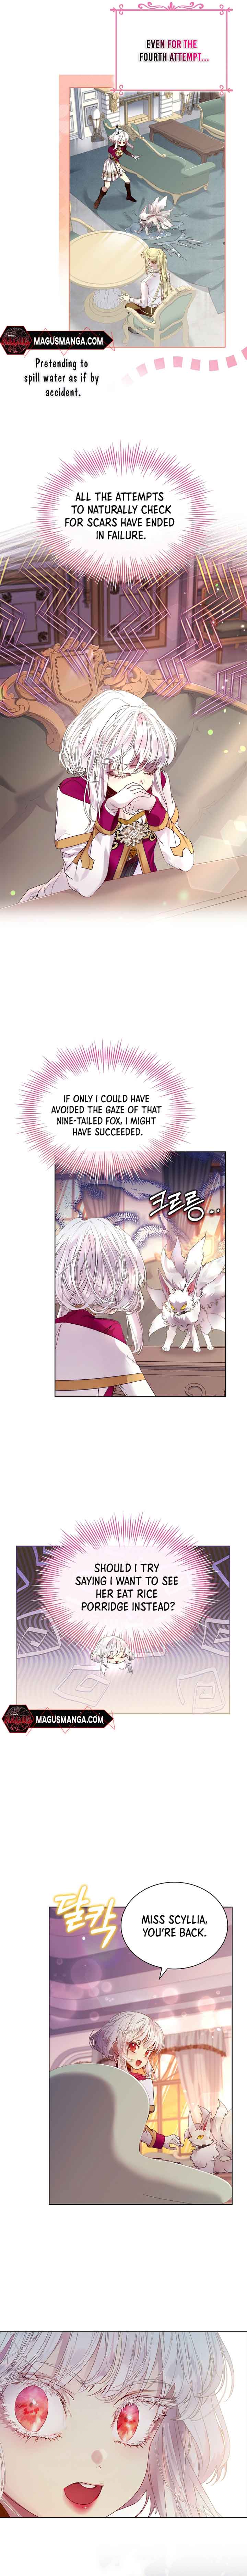 I Raised the Nine – Tailed Fox Wrongly chapter 22